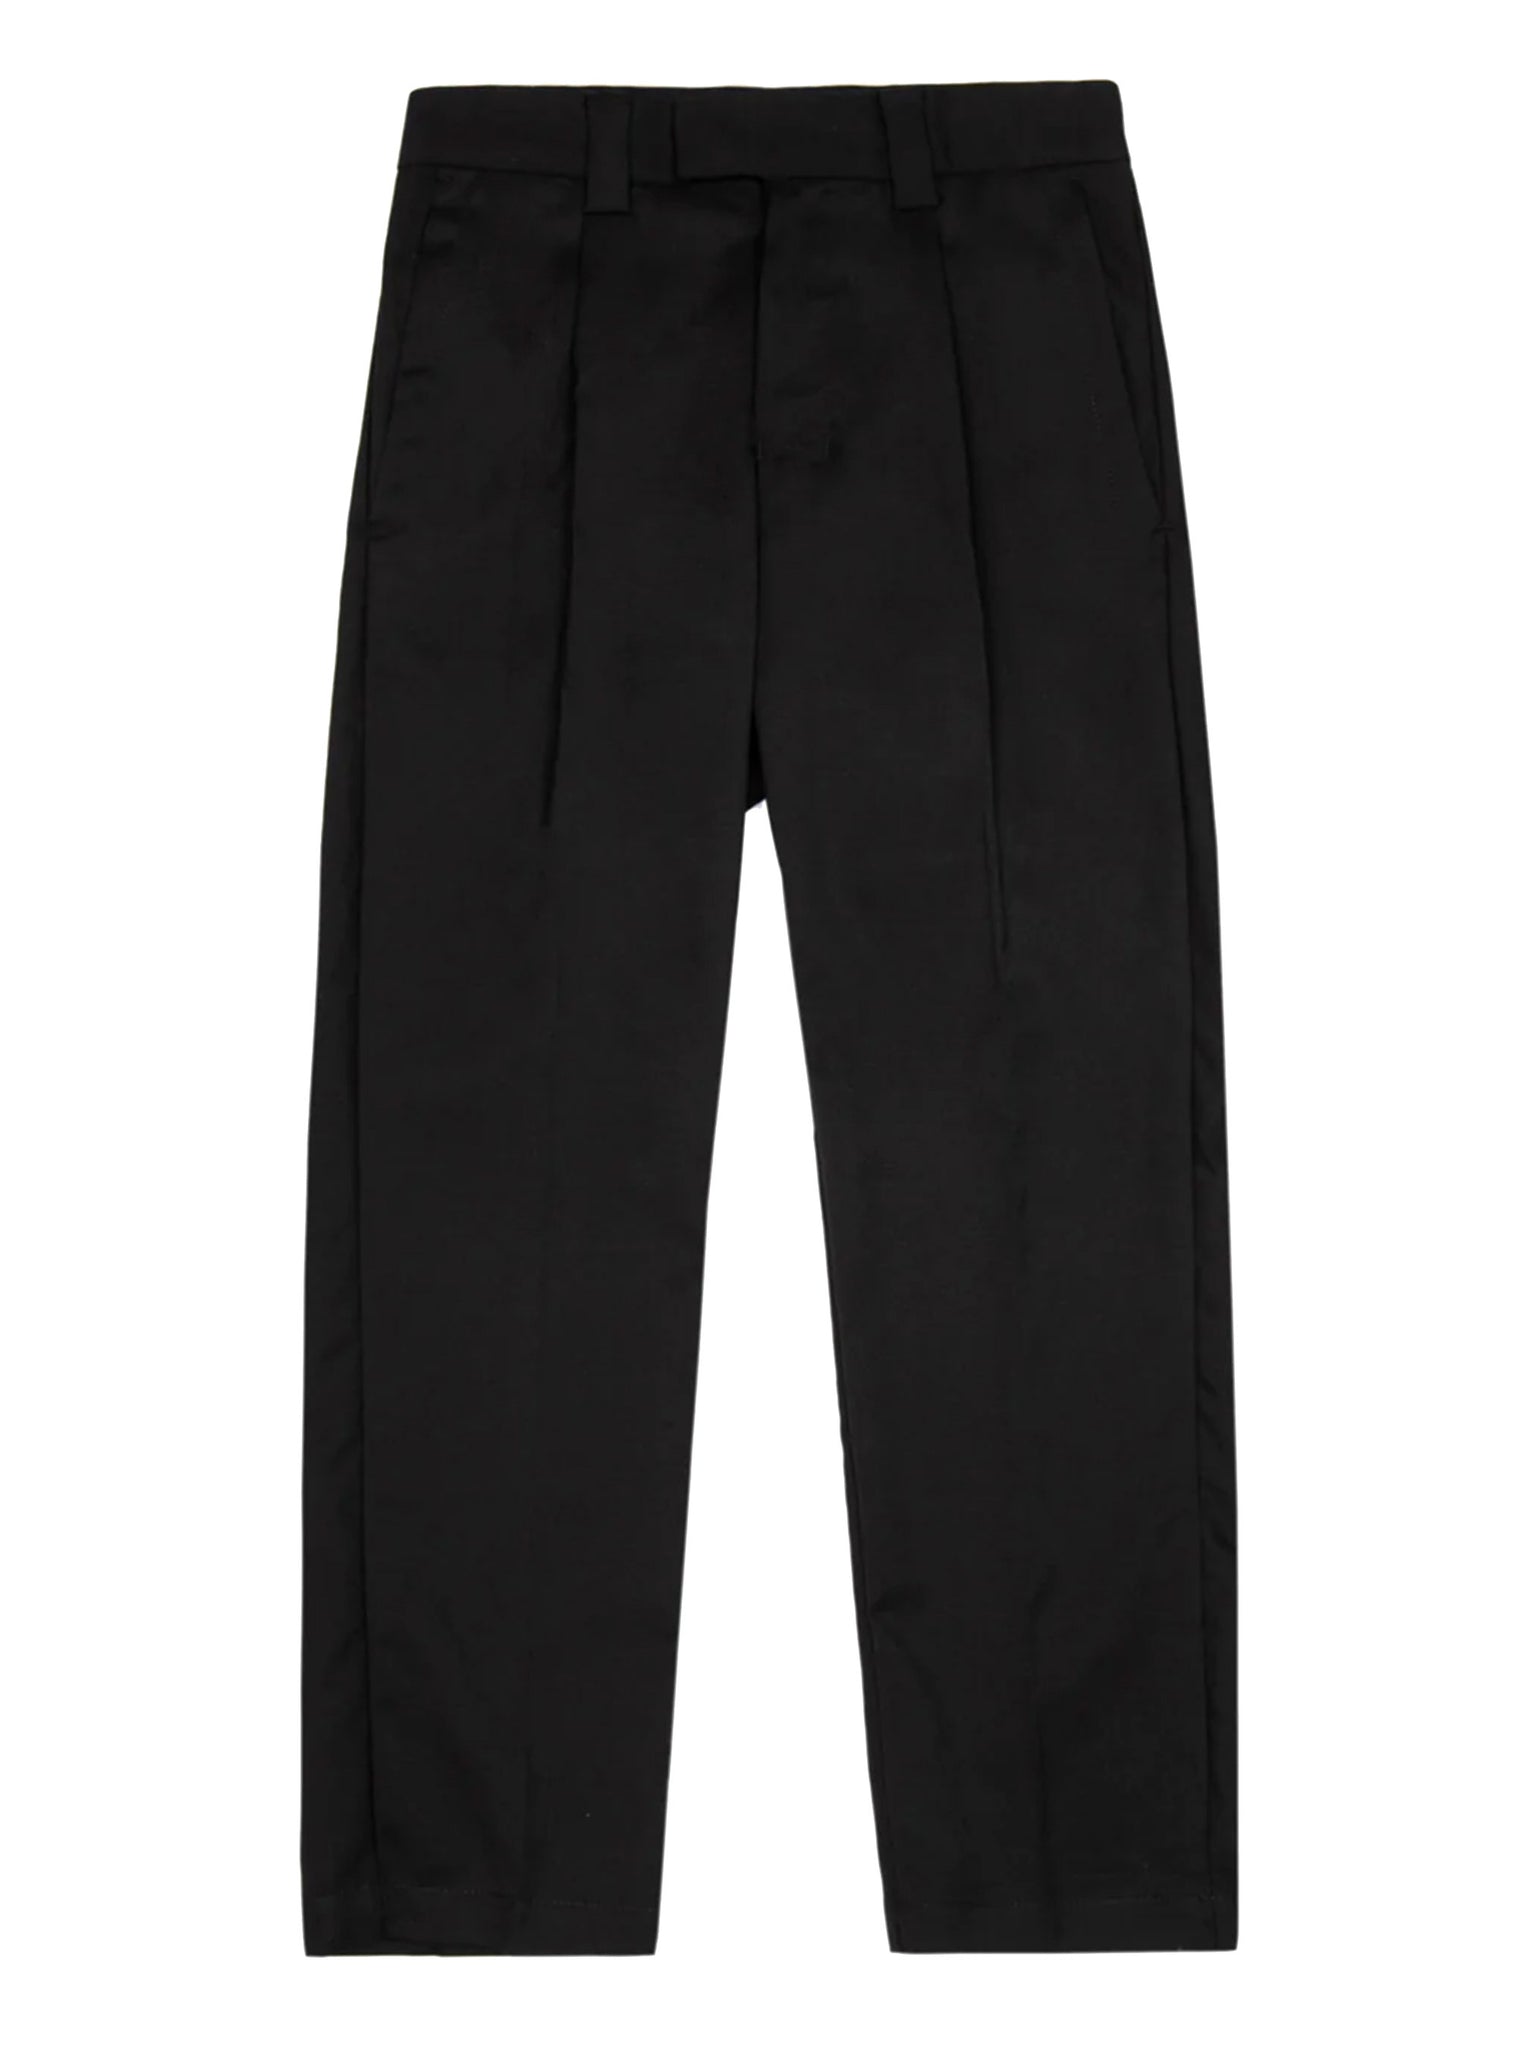 PLEATED DRESS TROUSERS